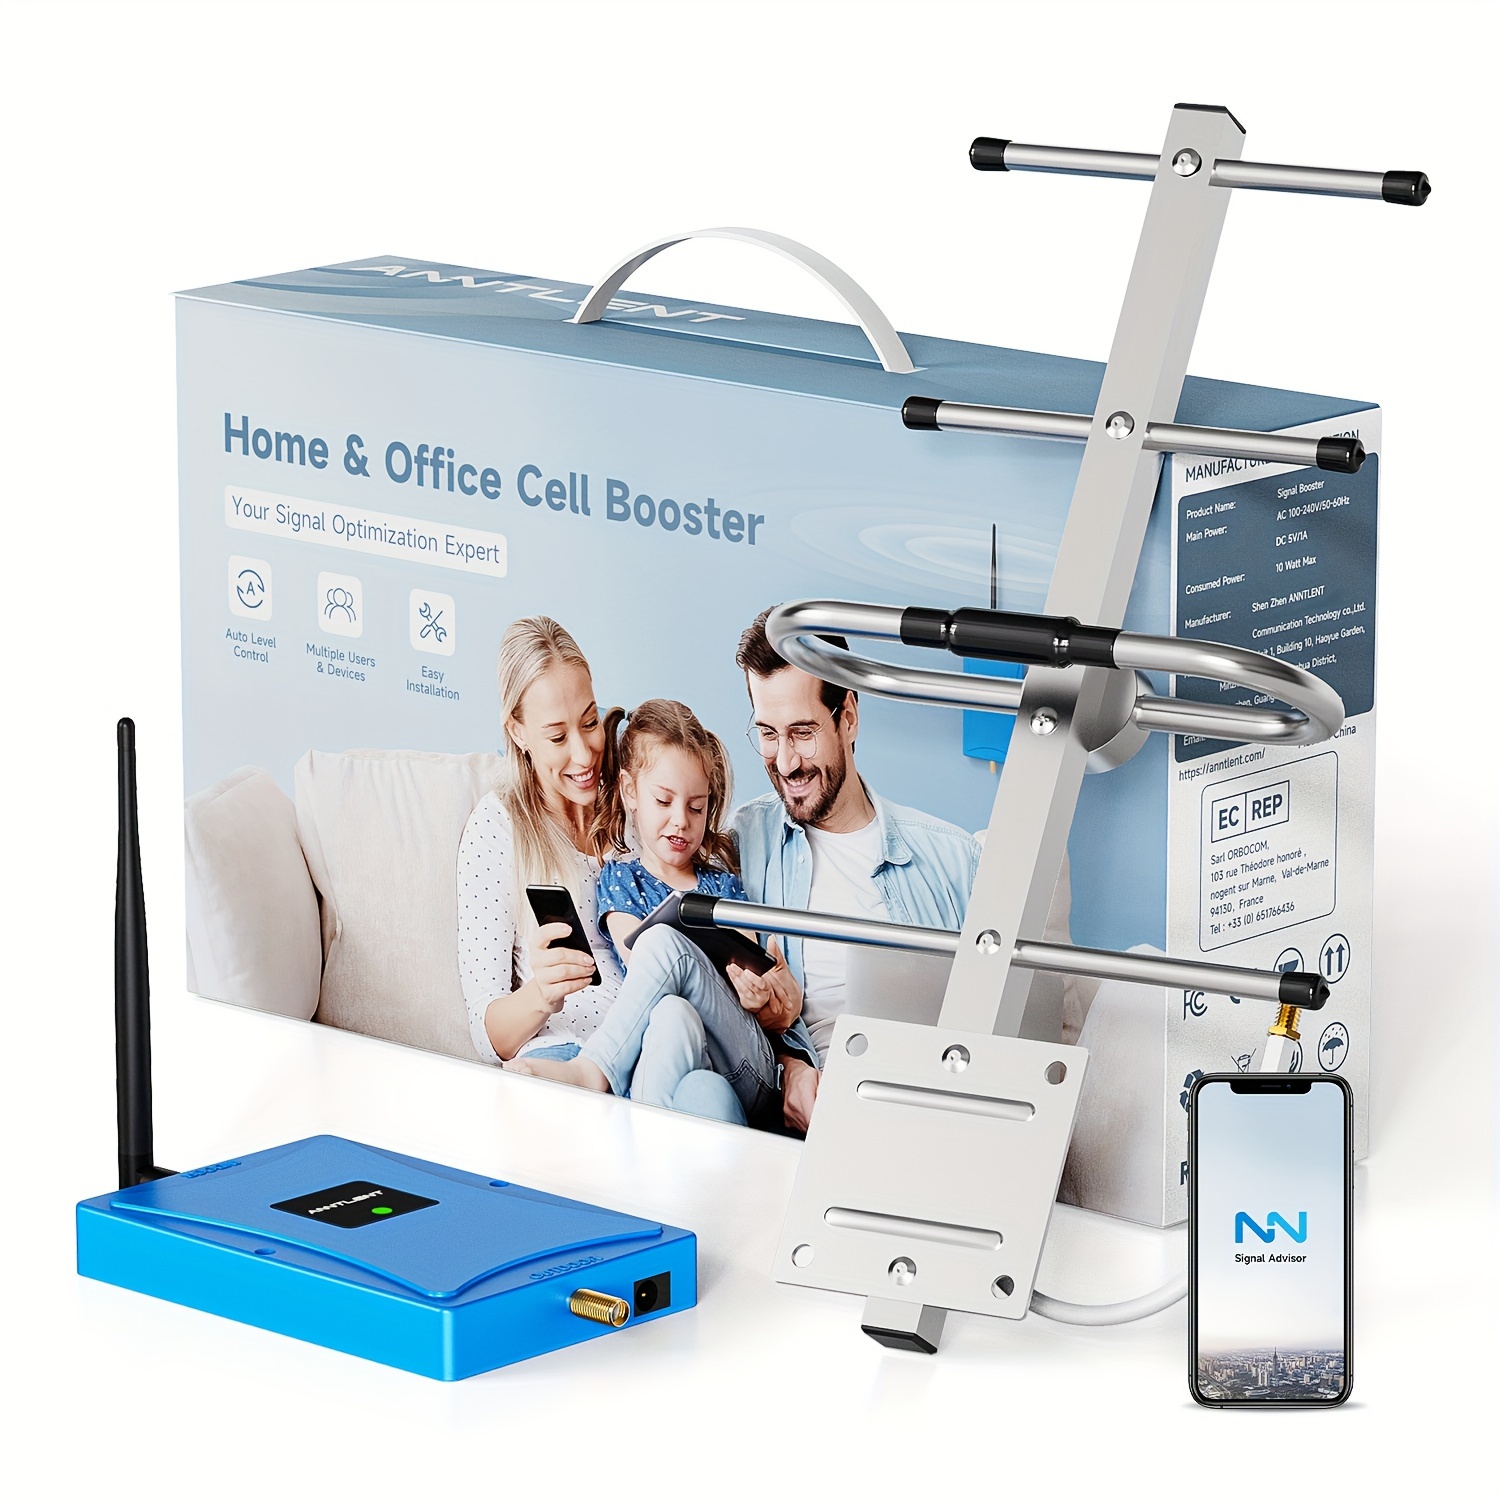 

Cell Phone Signal Booster, Smart App Help Install, High Gain Outside Antenna, Boost 5g & Lte Signal On Band 13, Fcc Approved